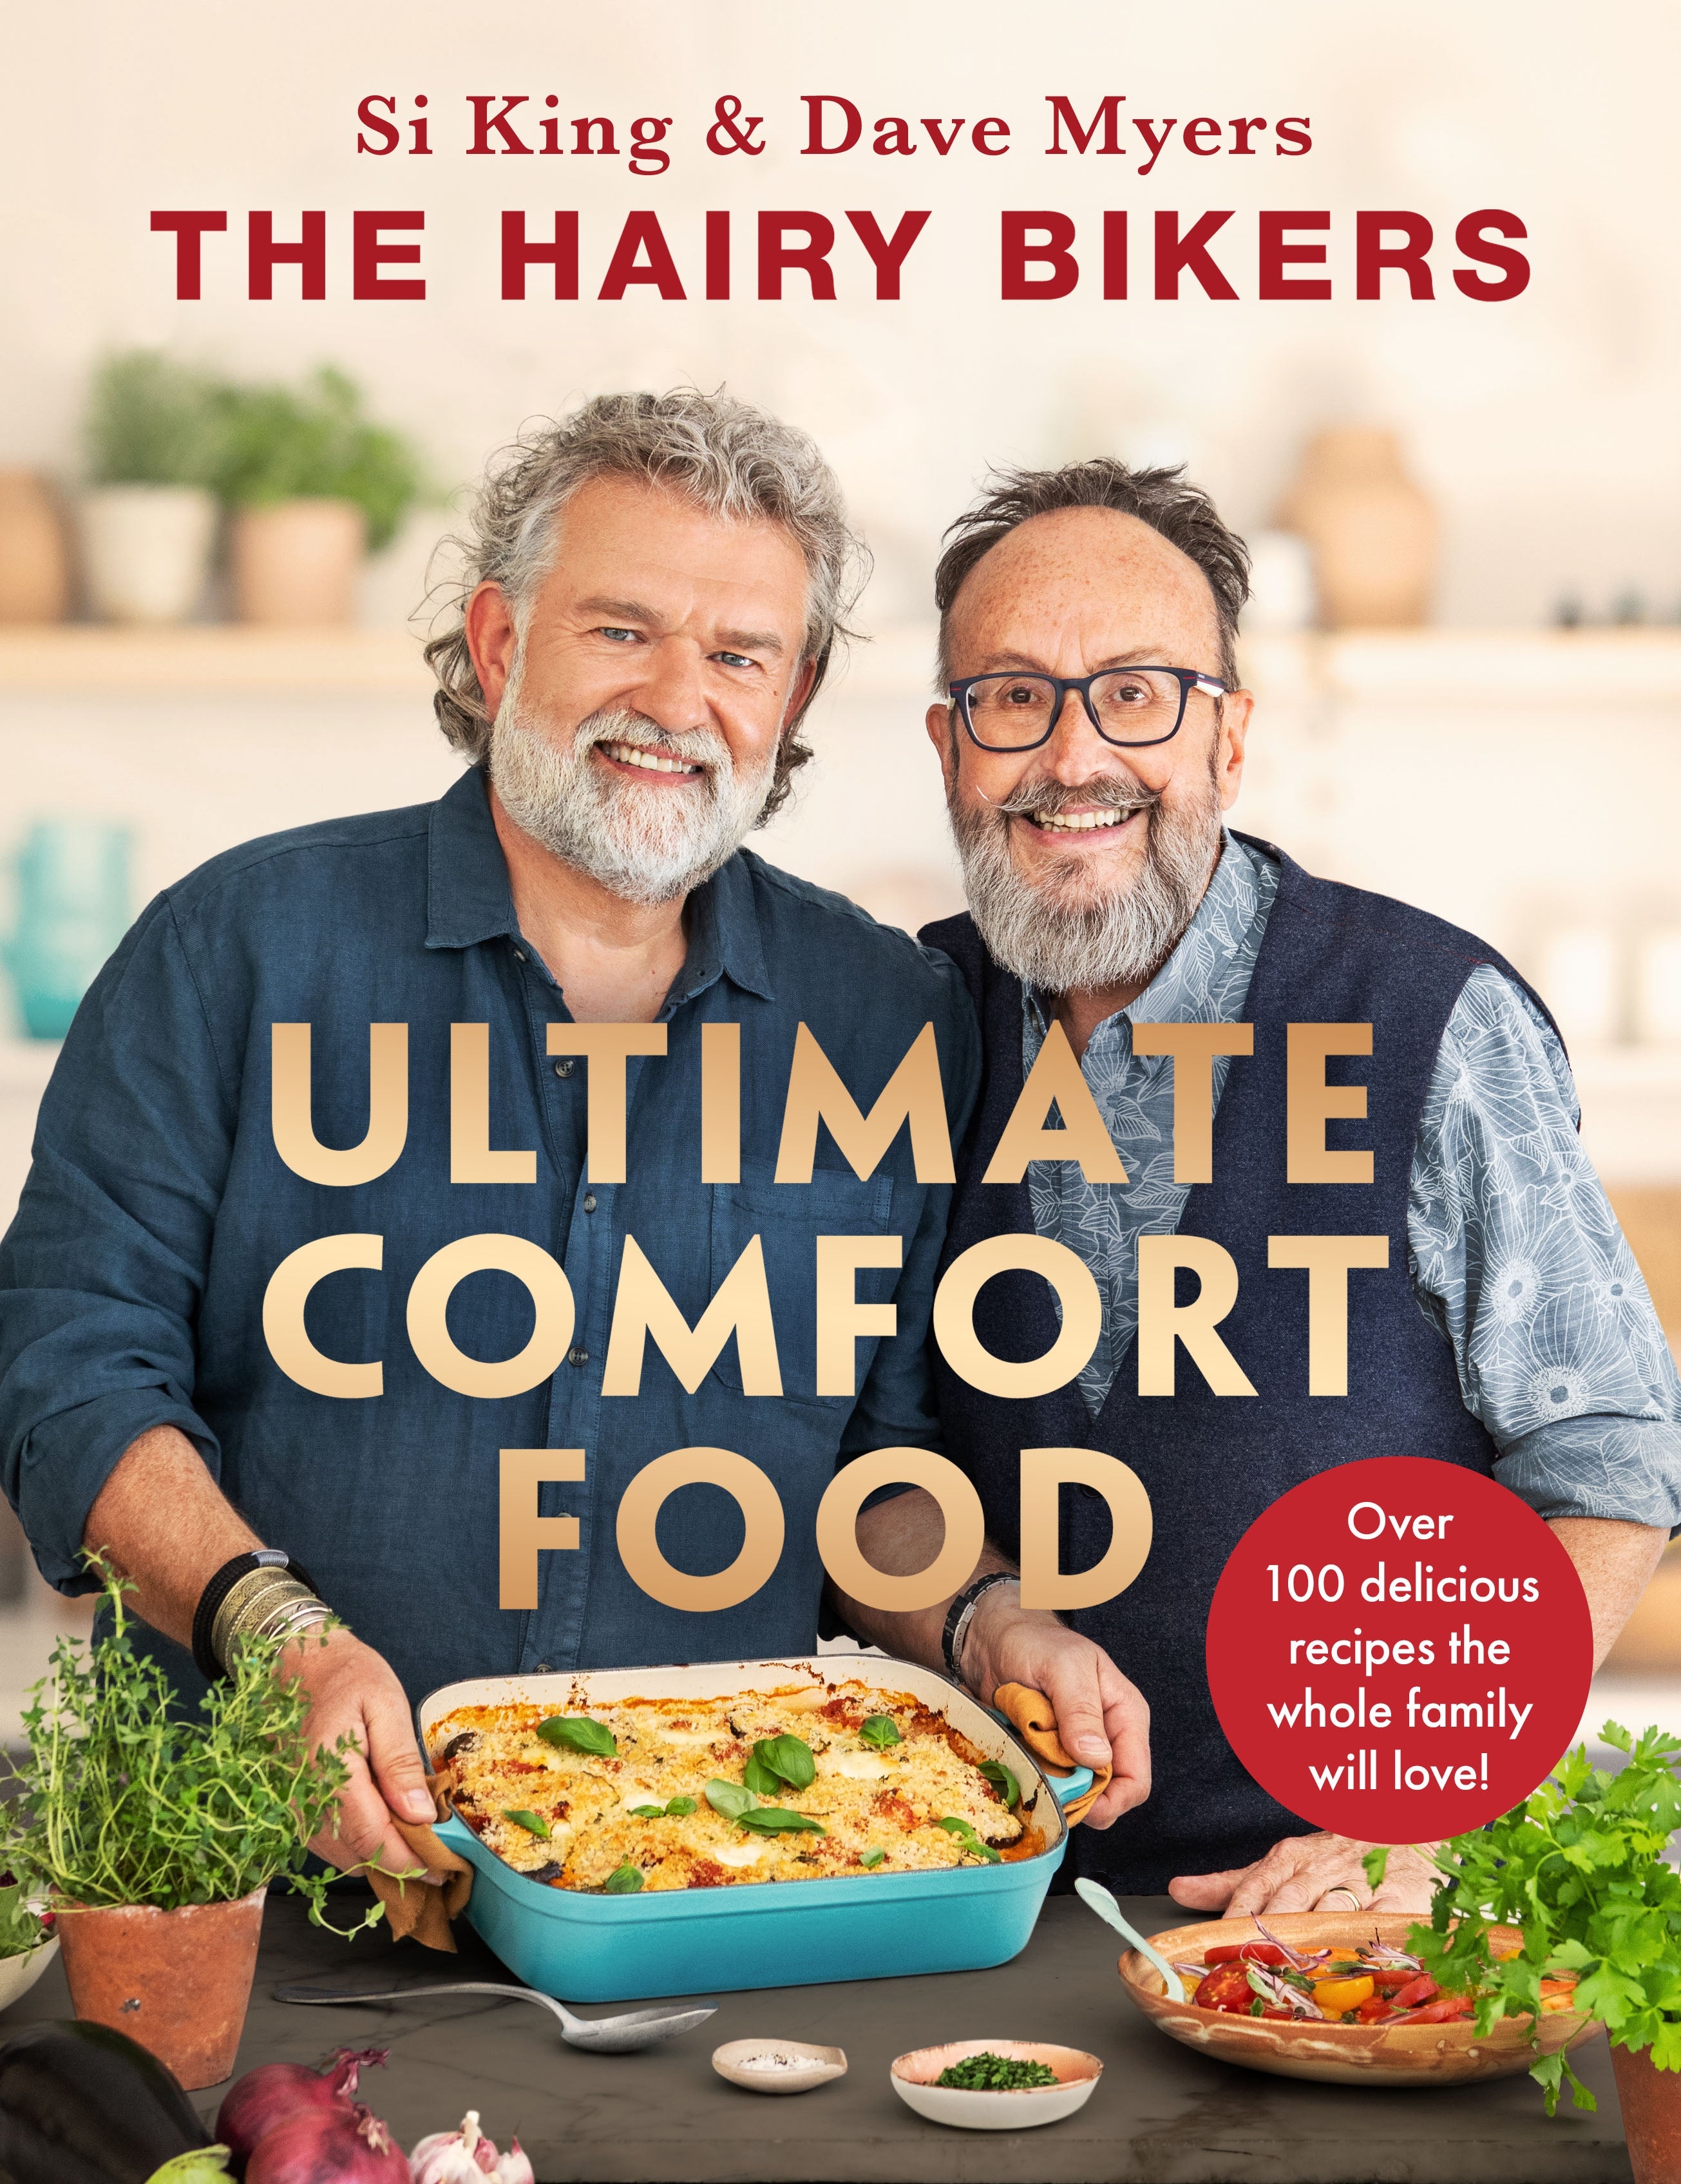 james martin, hairy bikers, comfort food, shopping, recipes, food, three new cookbooks worth buying, from james martin to the hairy bikers